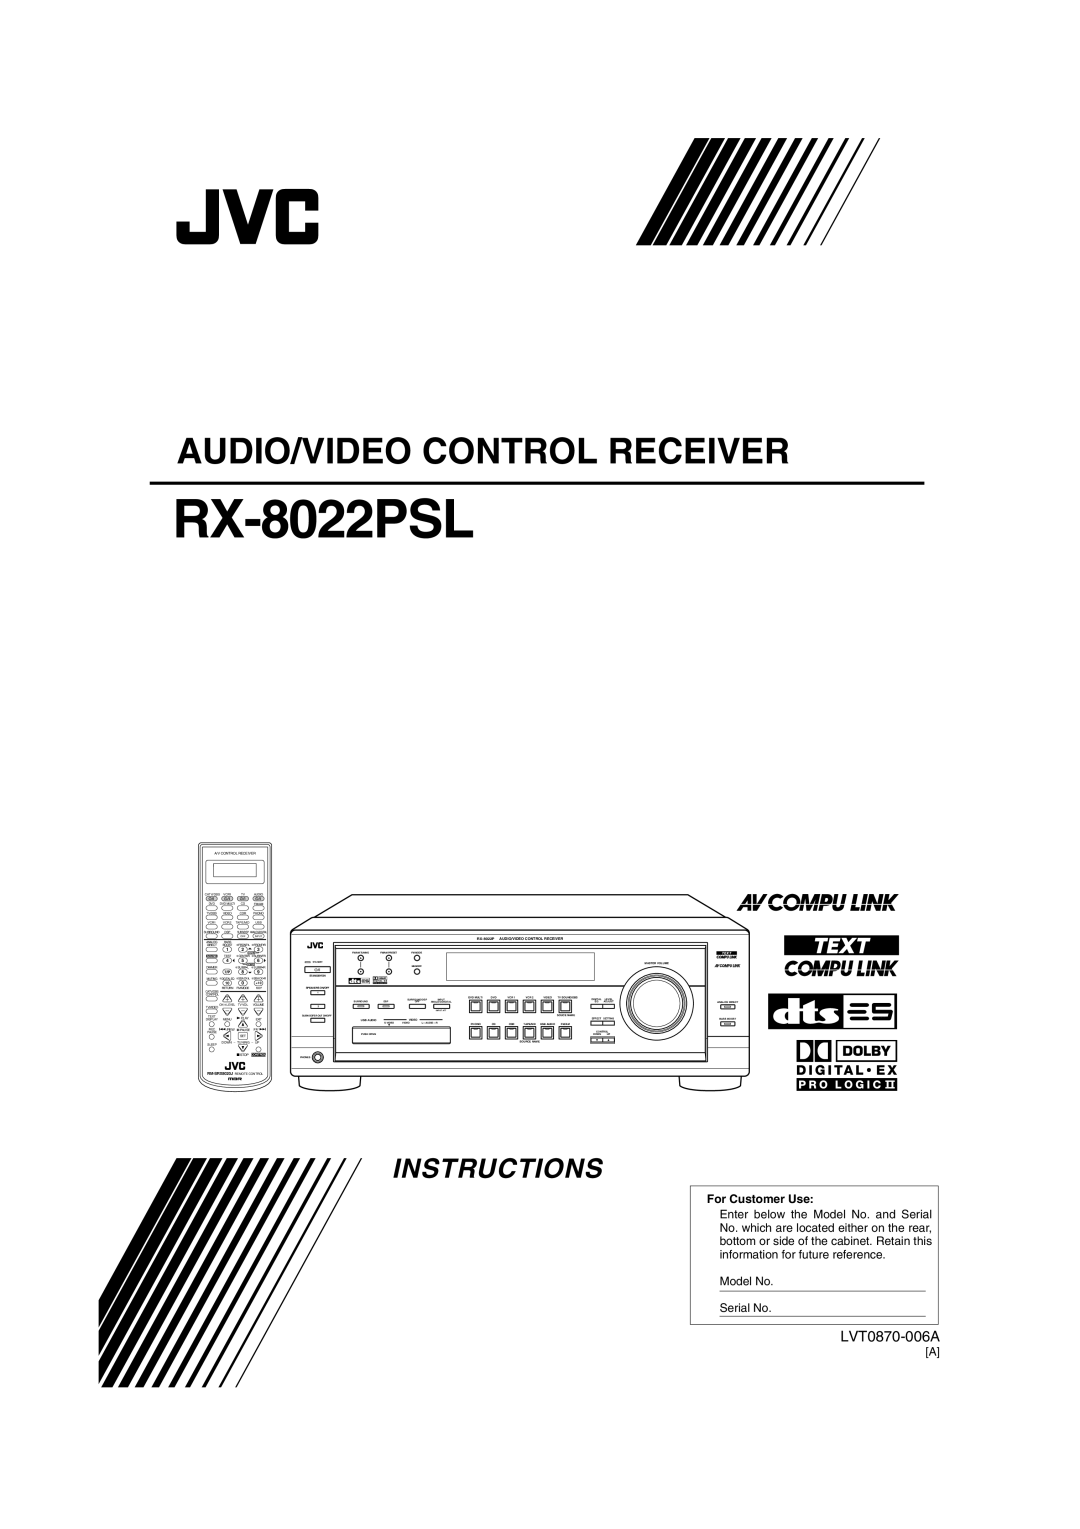 JVC RX-8022PSL manual Audio/Video Control Receiver, Instructions, LVT0870-006A, For Customer Use 